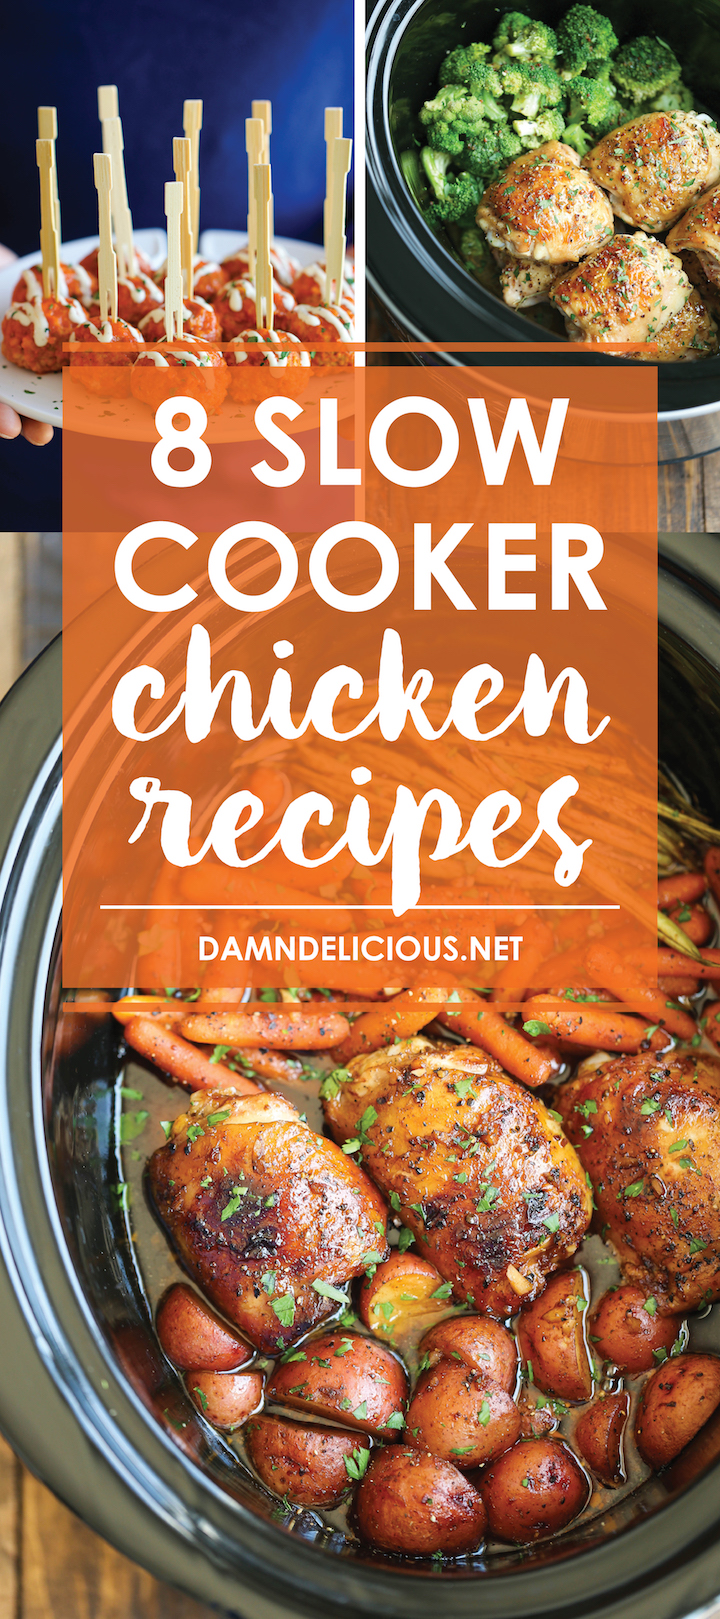 8 Slow Cooker Chicken Recipes - No more boring chicken dinners! With the help of your crockpot, set it and forget it for the BEST/easiest chicken dinners!